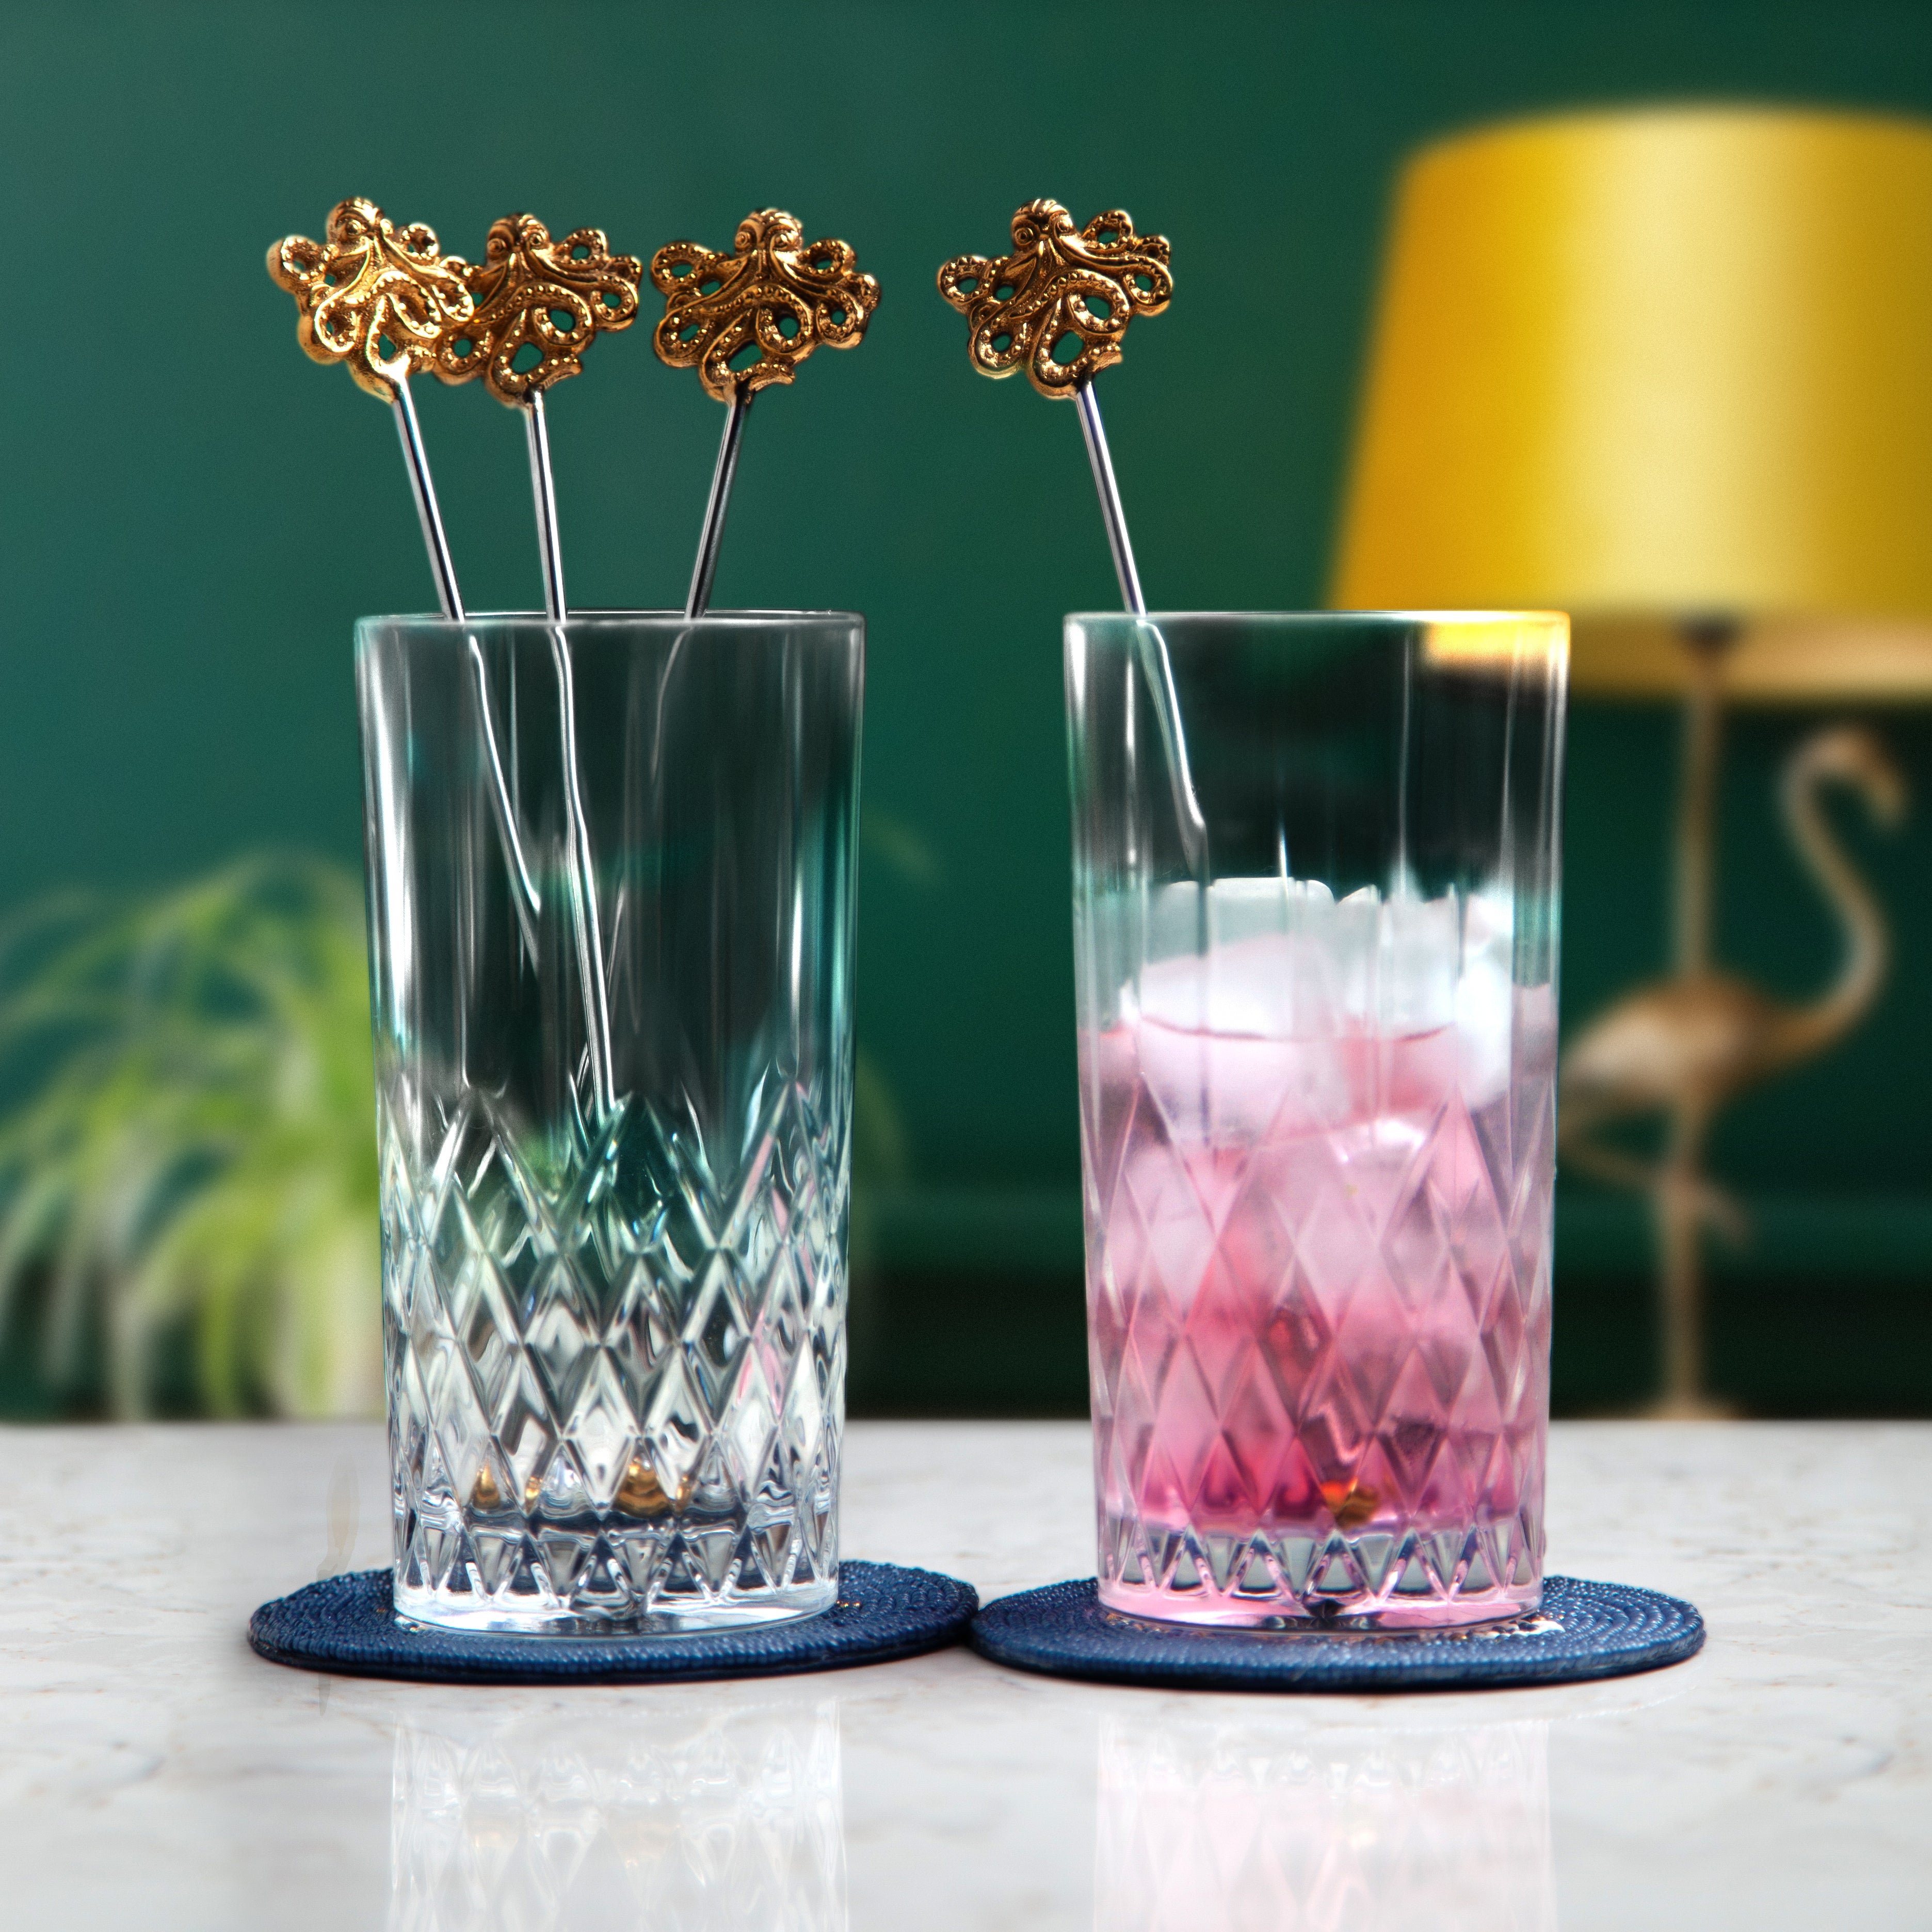 Gold octopus drink stirrers inside two glasses placed on drink coasters